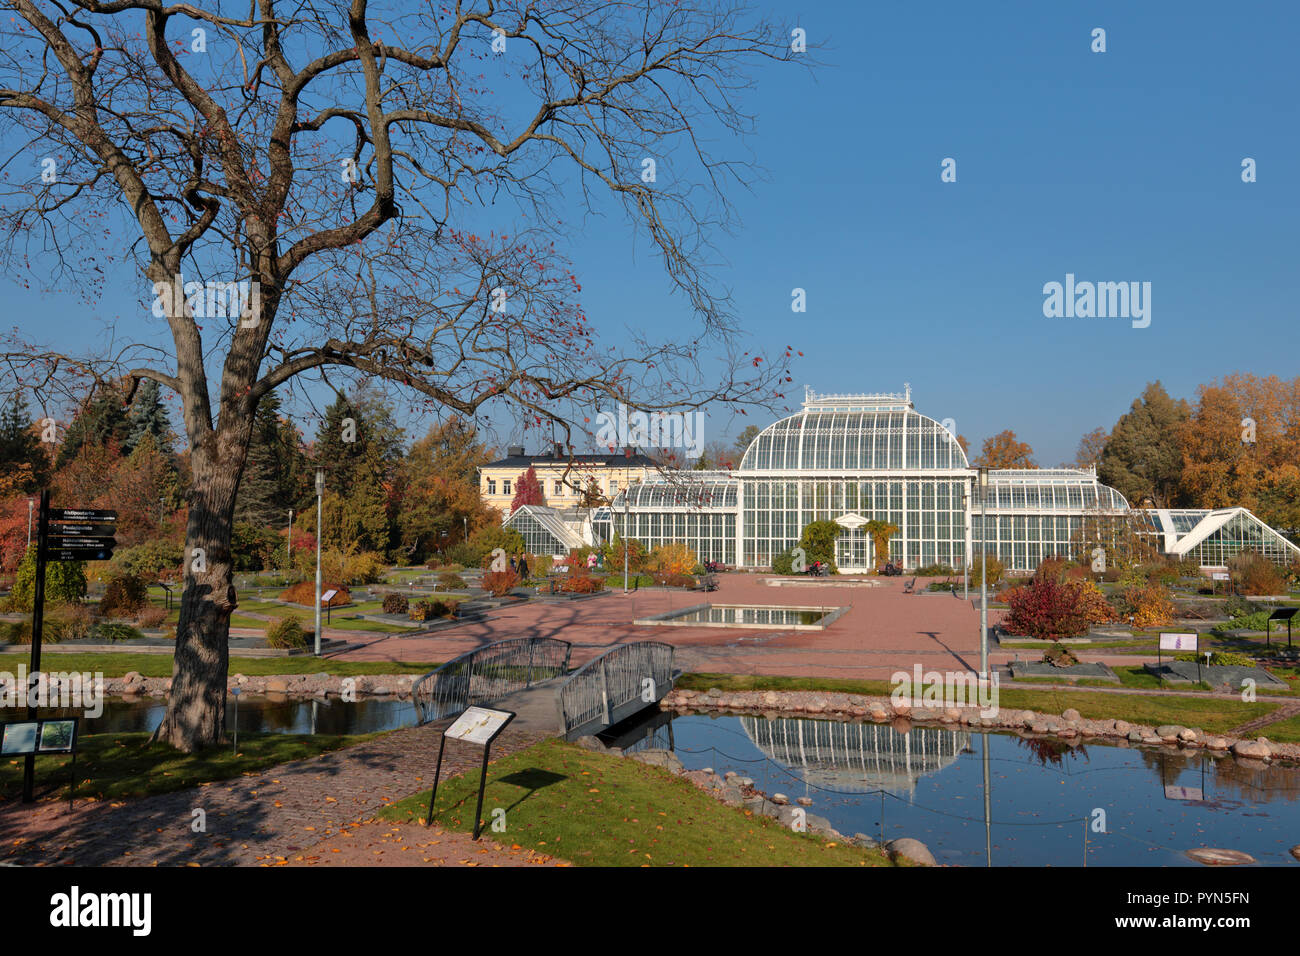 Helsinki, Finland - October 14, 2018: People walking and resting in Kaisaniemi botanic garden in front of Palm house. It was built in 1889 by design o Stock Photo